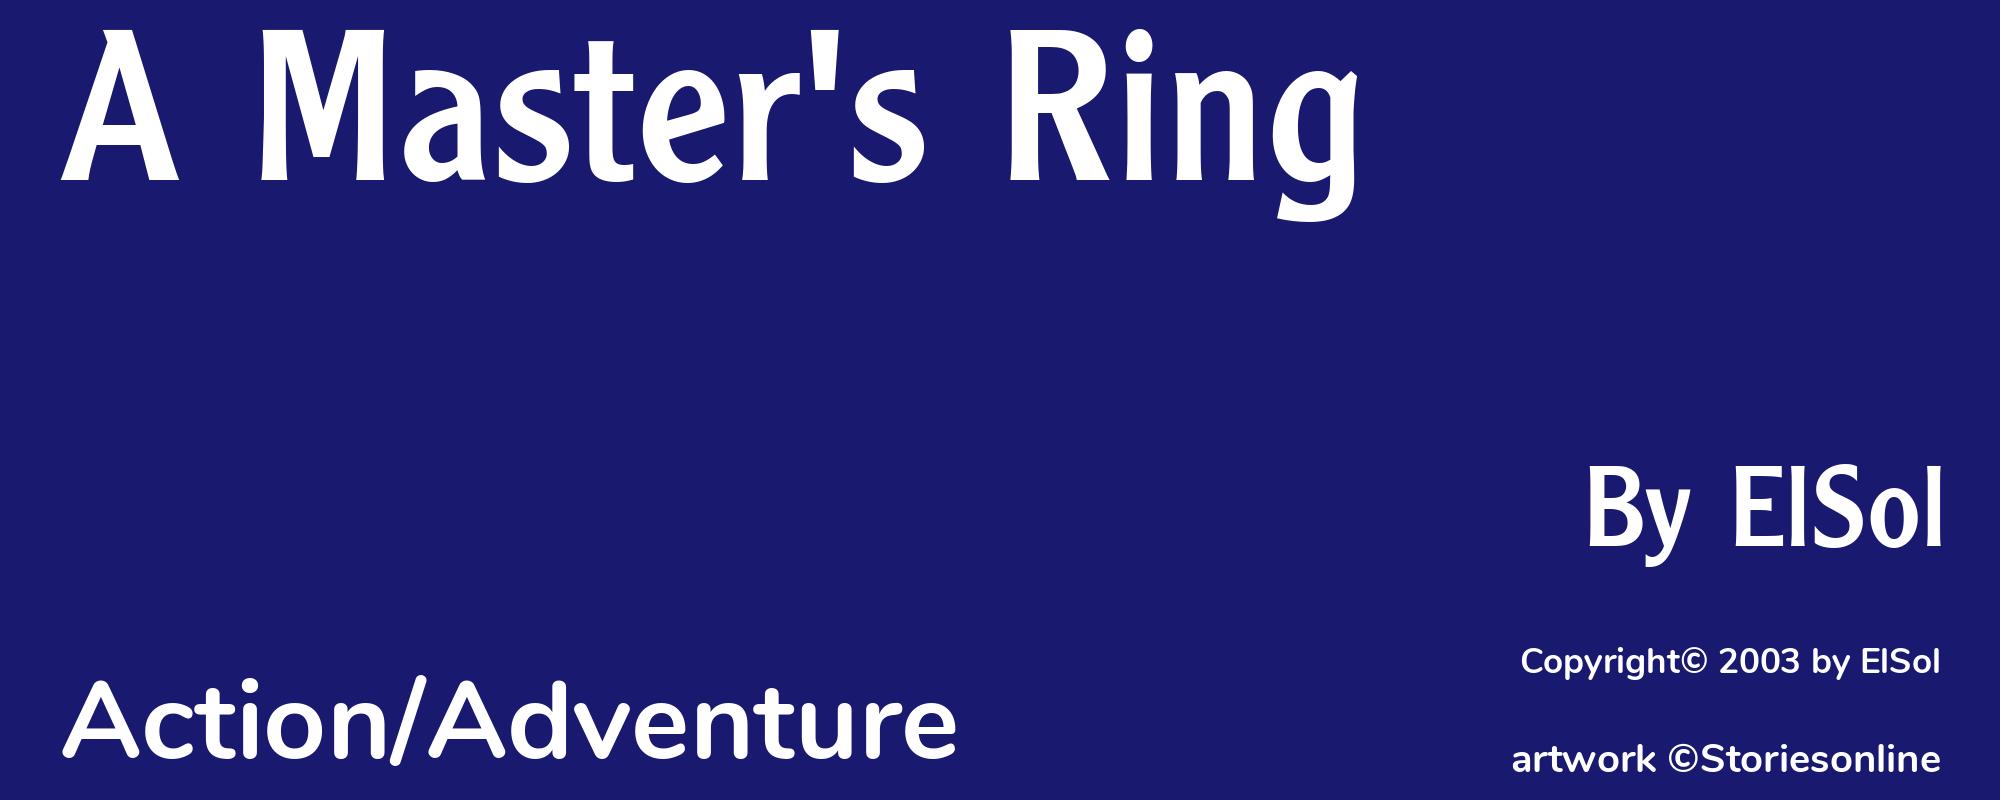 A Master's Ring - Cover